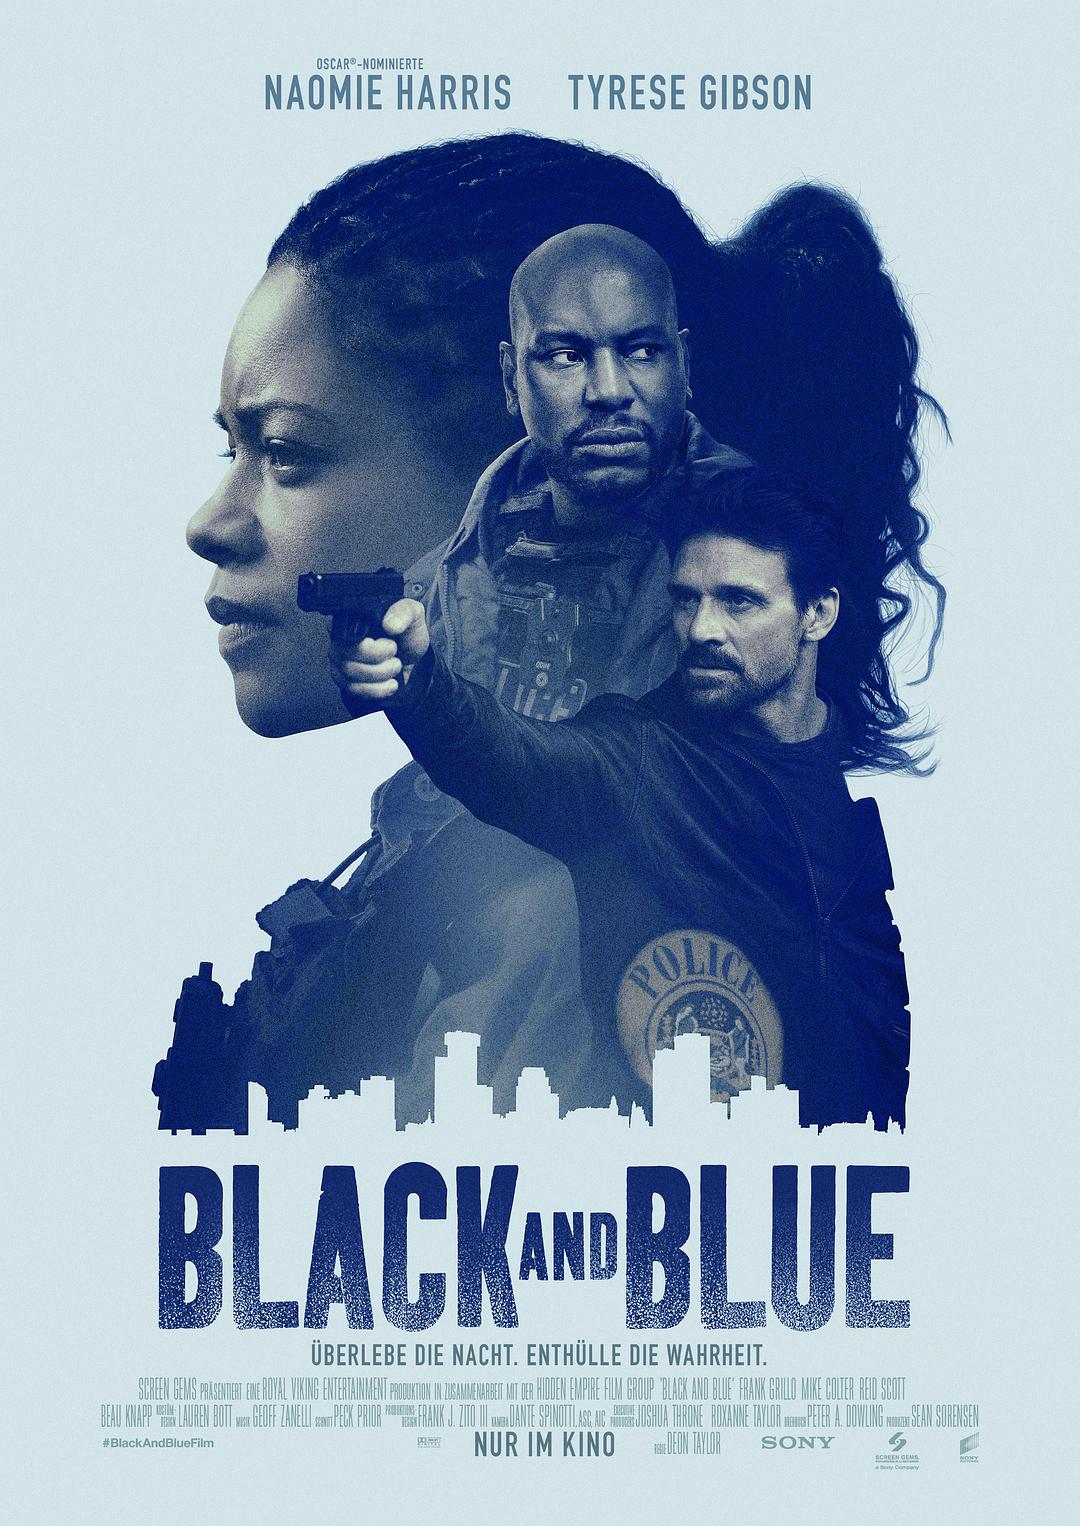  Black.and.Blue.2019.1080p.BluRay.x264.DTS-HD.MA.5.1-FGT 8.19GB-1.png